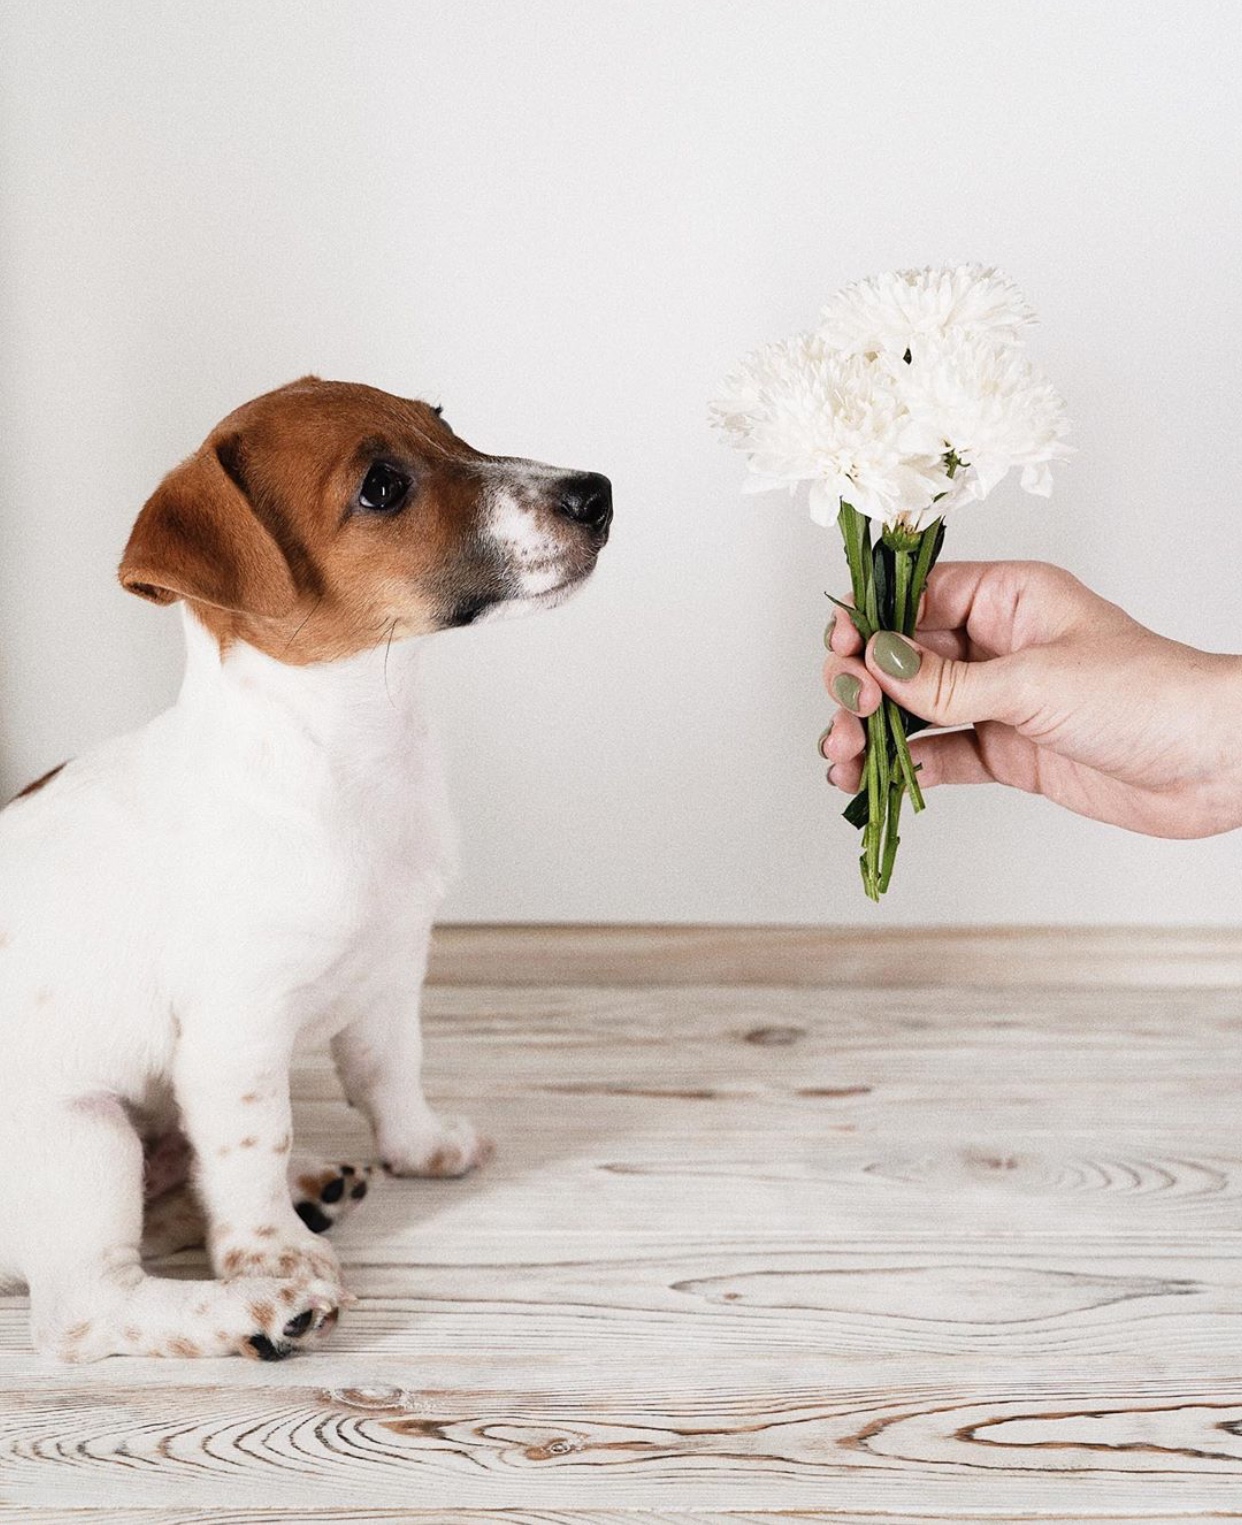 Jack Russell Terrier sitting on the wooden table while staring at the white flowers in the hand of a woman